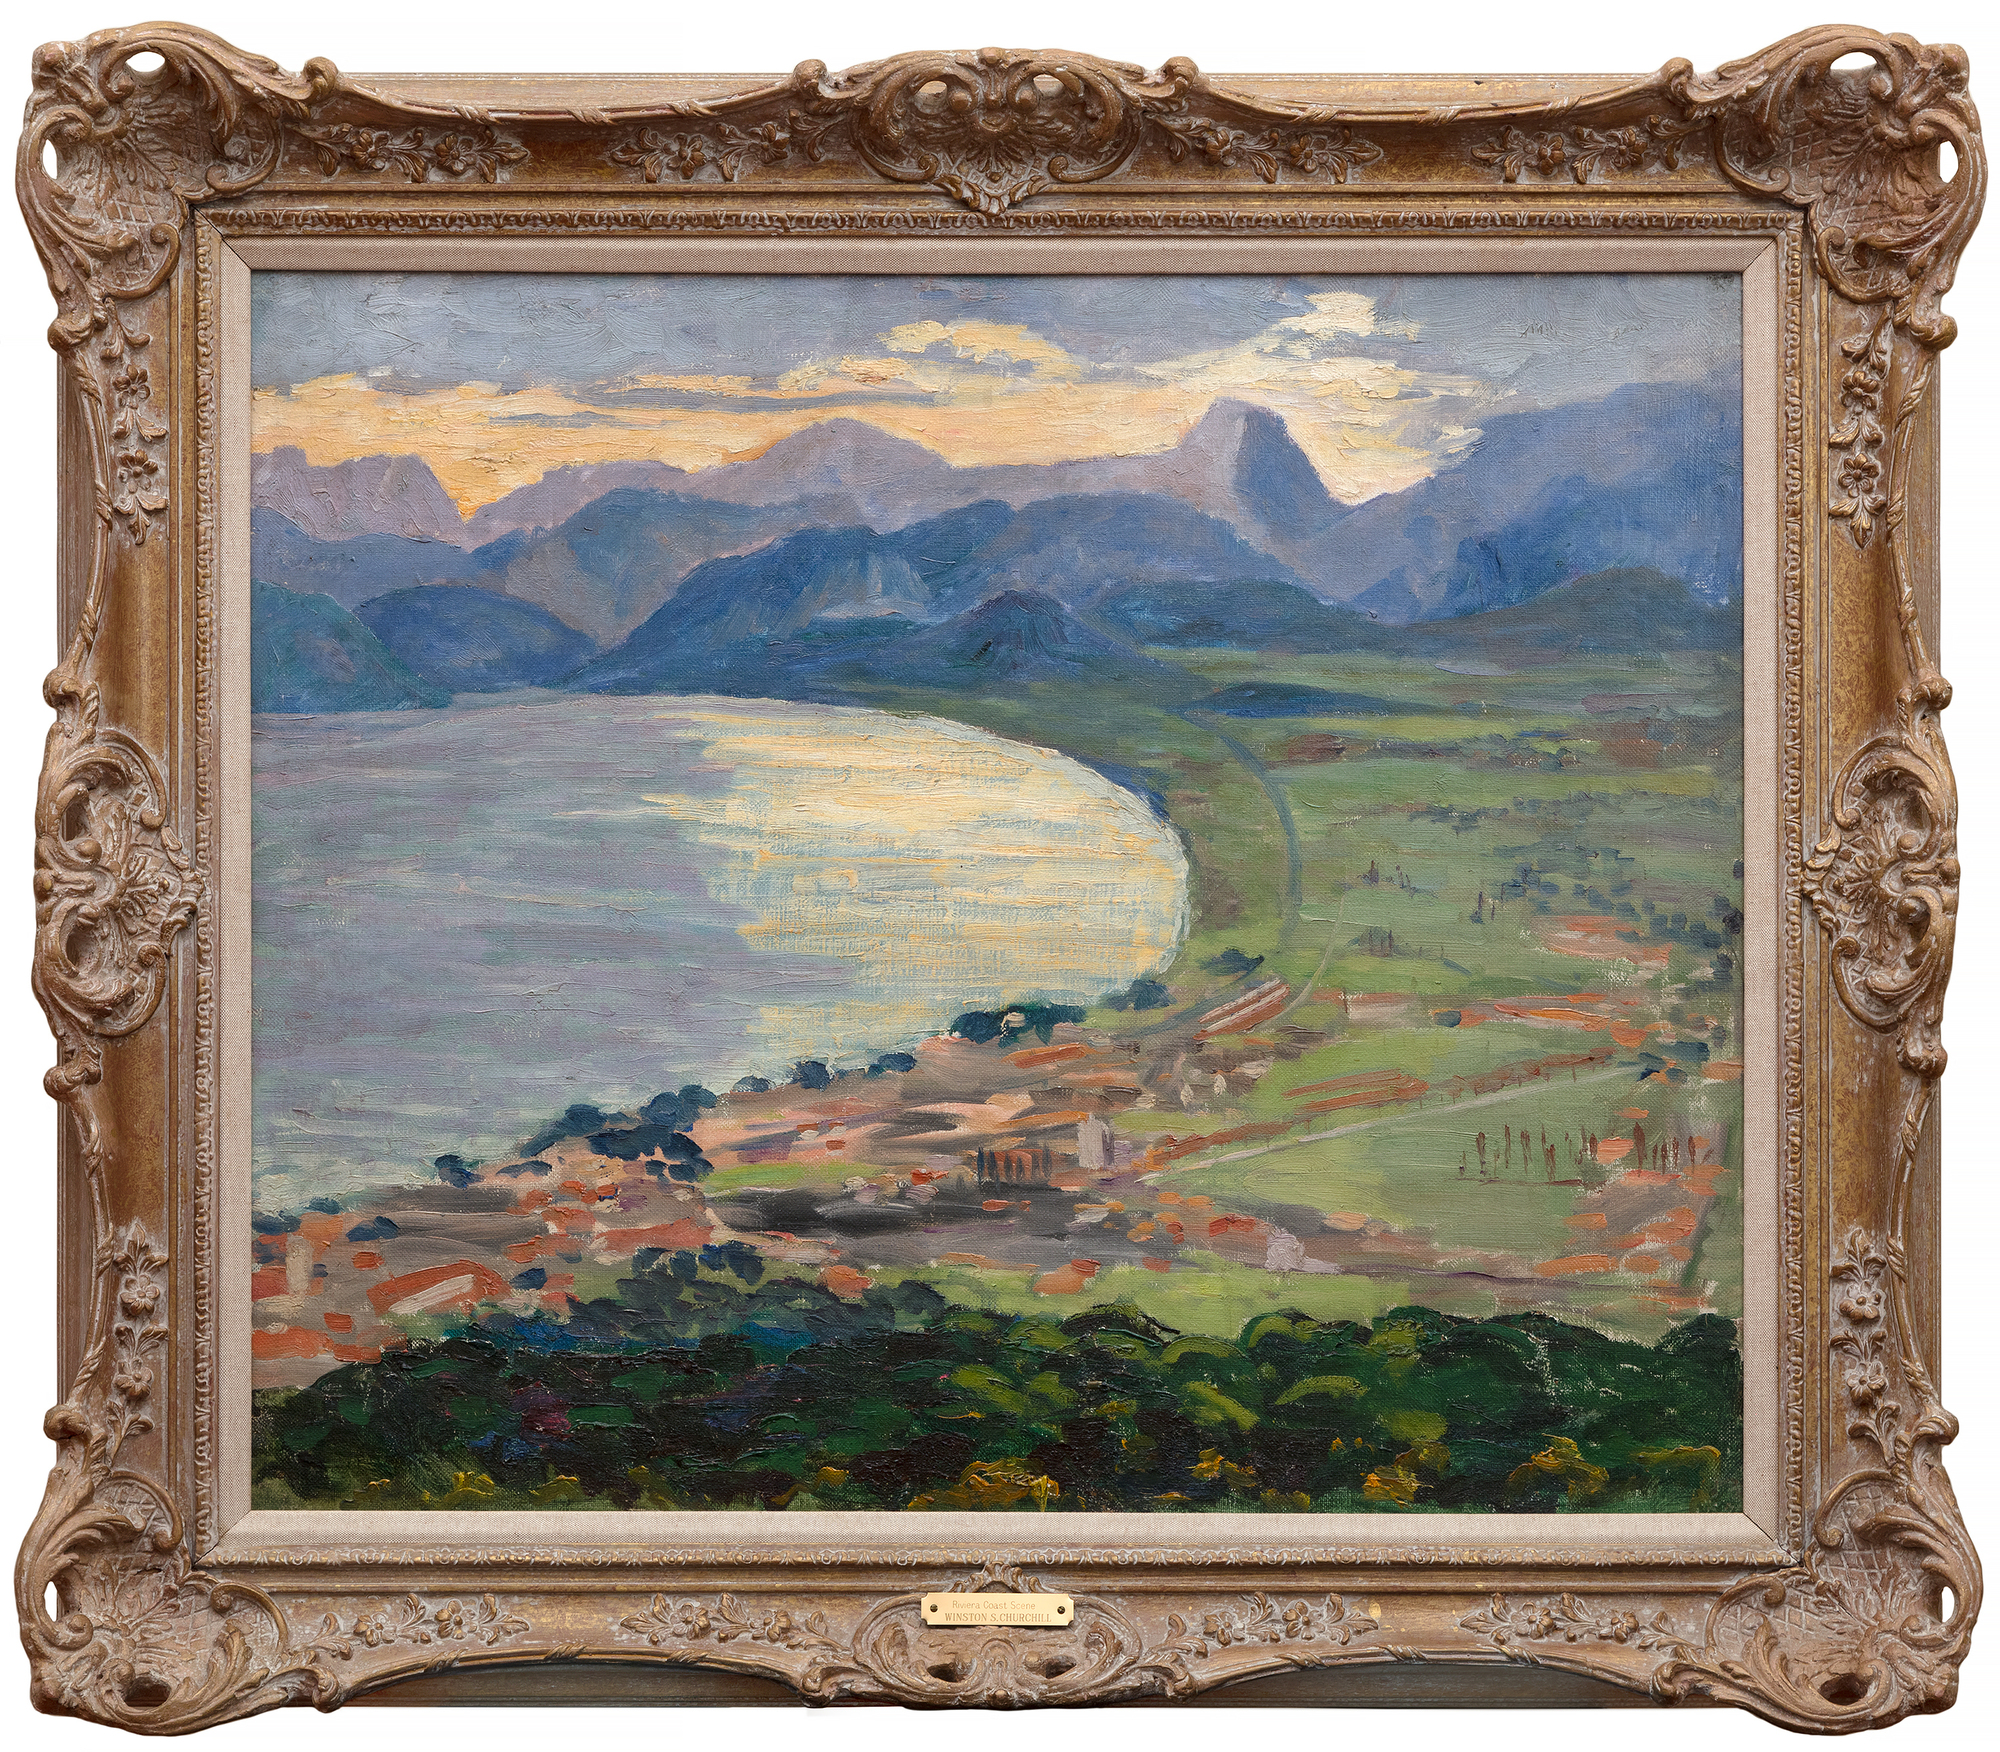 Painted from an unusually high vantage, “Riviera Coast Scene” vividly conveys the formidable distance and breadth of the scene from the perch where he set his easel.  Interestingly, Paul Rafferty did not include this painting in his book Winston Churchill: Painting on the French Riviera, believing it could likely be a scene from the Italian Lake District, where Churchill also painted in the same time period.
<br>
<br>Paintings by Churchill can function as a glimpse into his extensive travels and his colorful life. Churchill most likely painted “Riviera Coast Scene” during a holiday at Chateau de l’Horizon, home of Maxine Elliot, a friend of his mother. Elliot, originally from Rockland, Maine, was a successful actress and socialite.
<br>
<br>Within this painting, we see the influence of the Impressionists who utilized unusual viewpoints, modeled after Japanese woodblock prints, but also evidence of their attempts to push the boundaries of the landscape genre